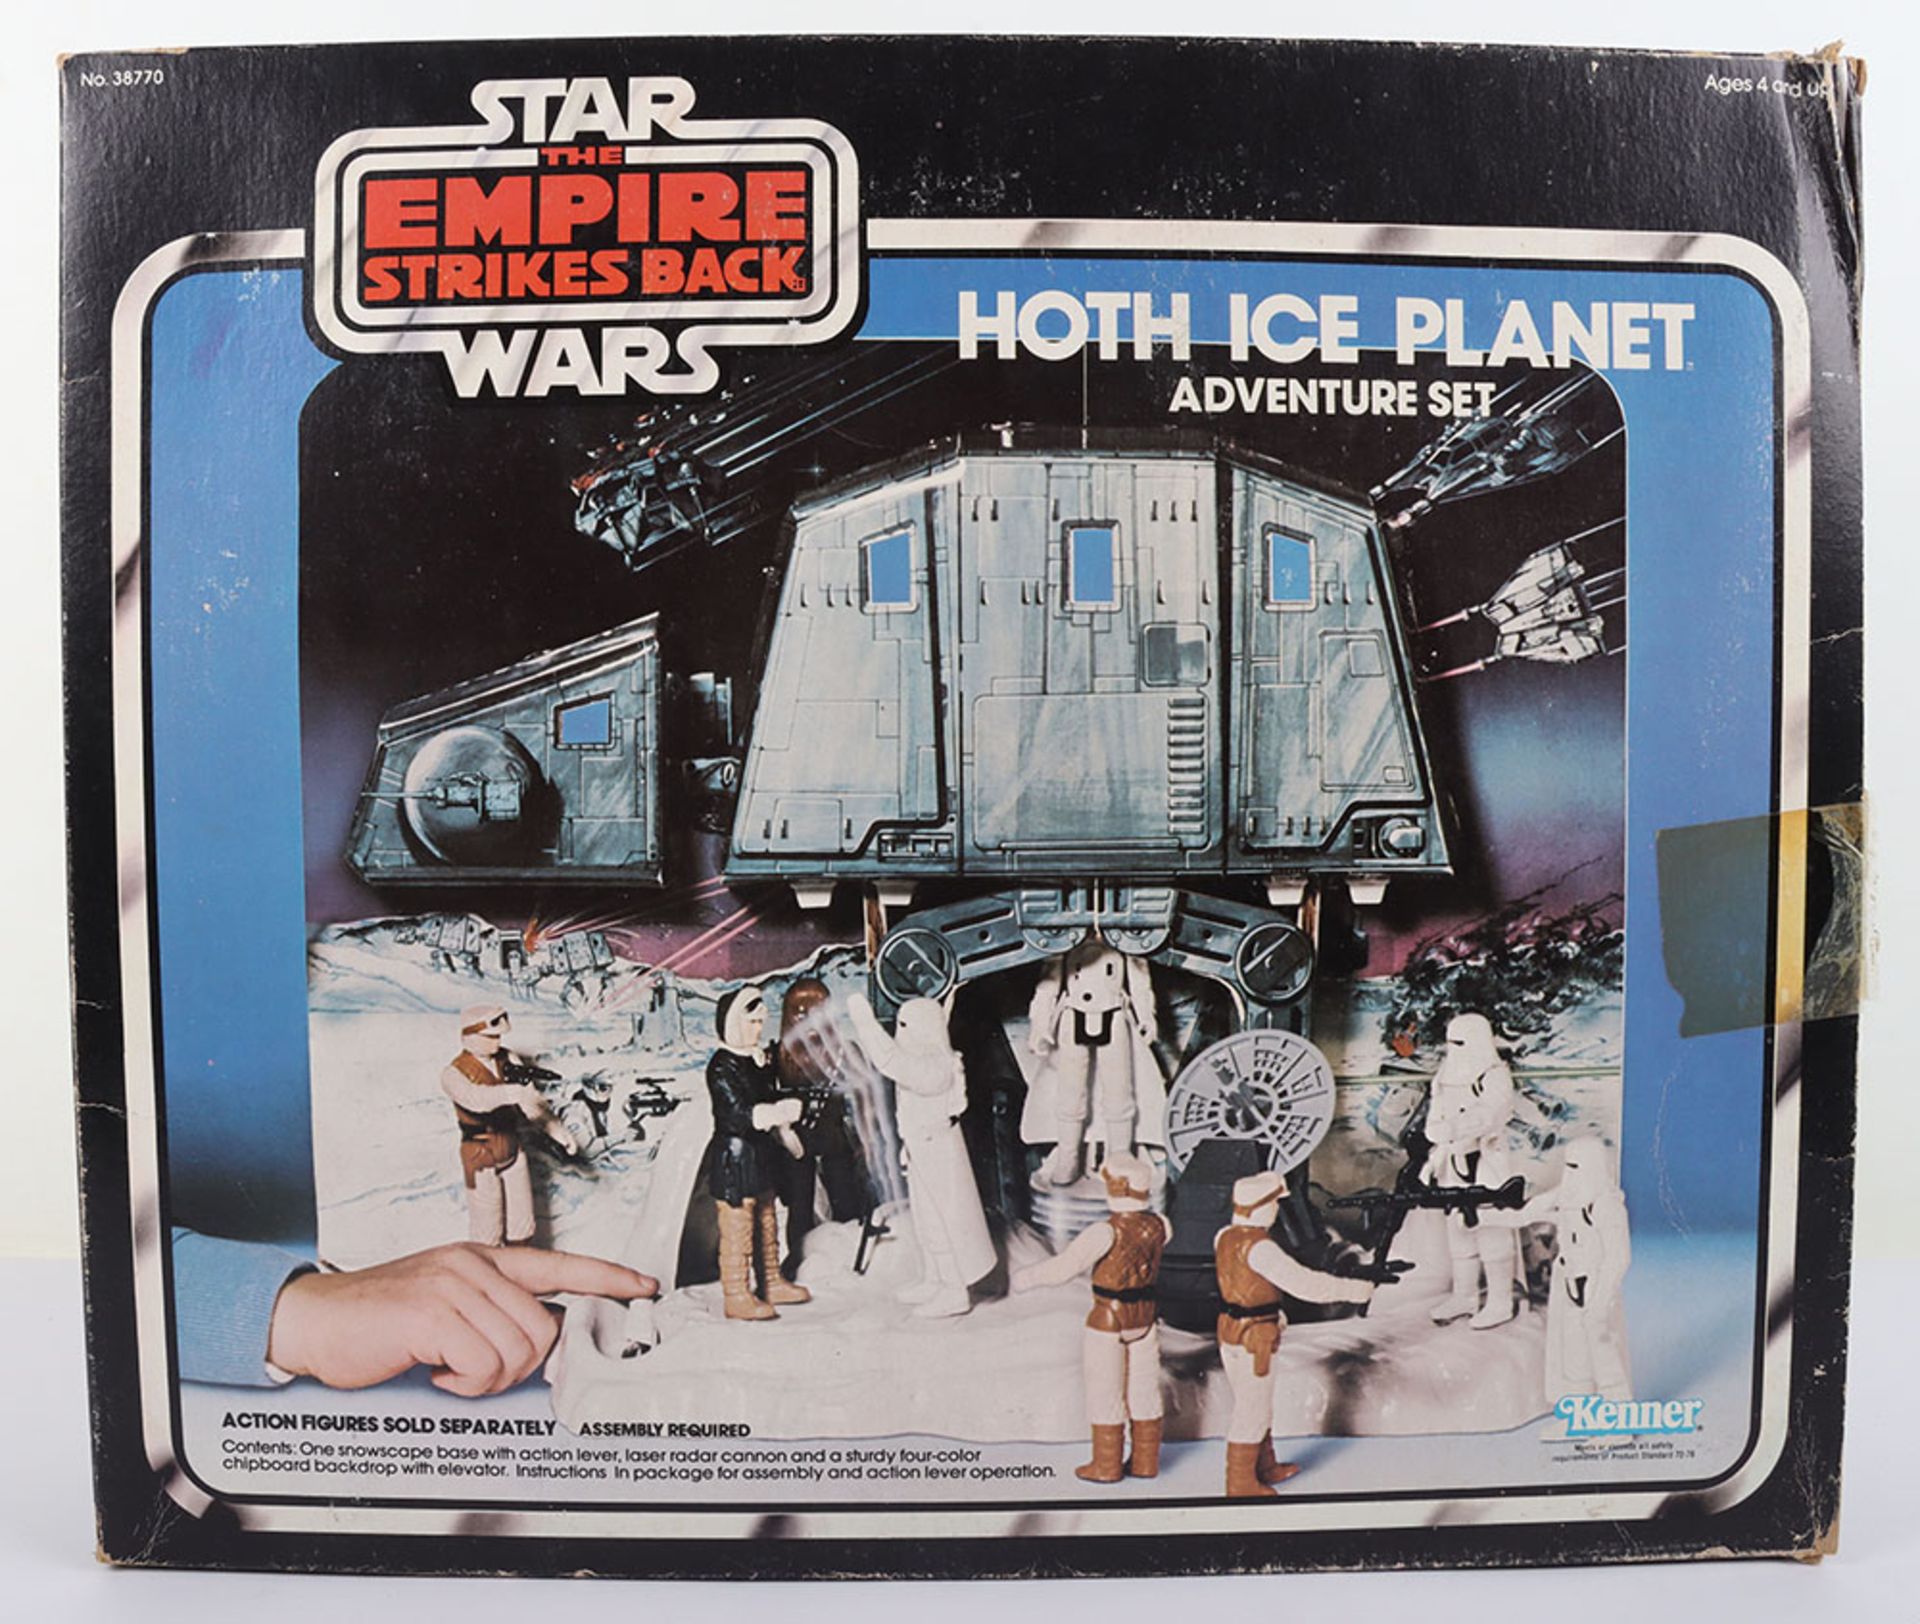 Boxed Vintage Kenner Star Wars The Empire Strikes Back Hoth Ice Planet Adventure Set - Image 12 of 16